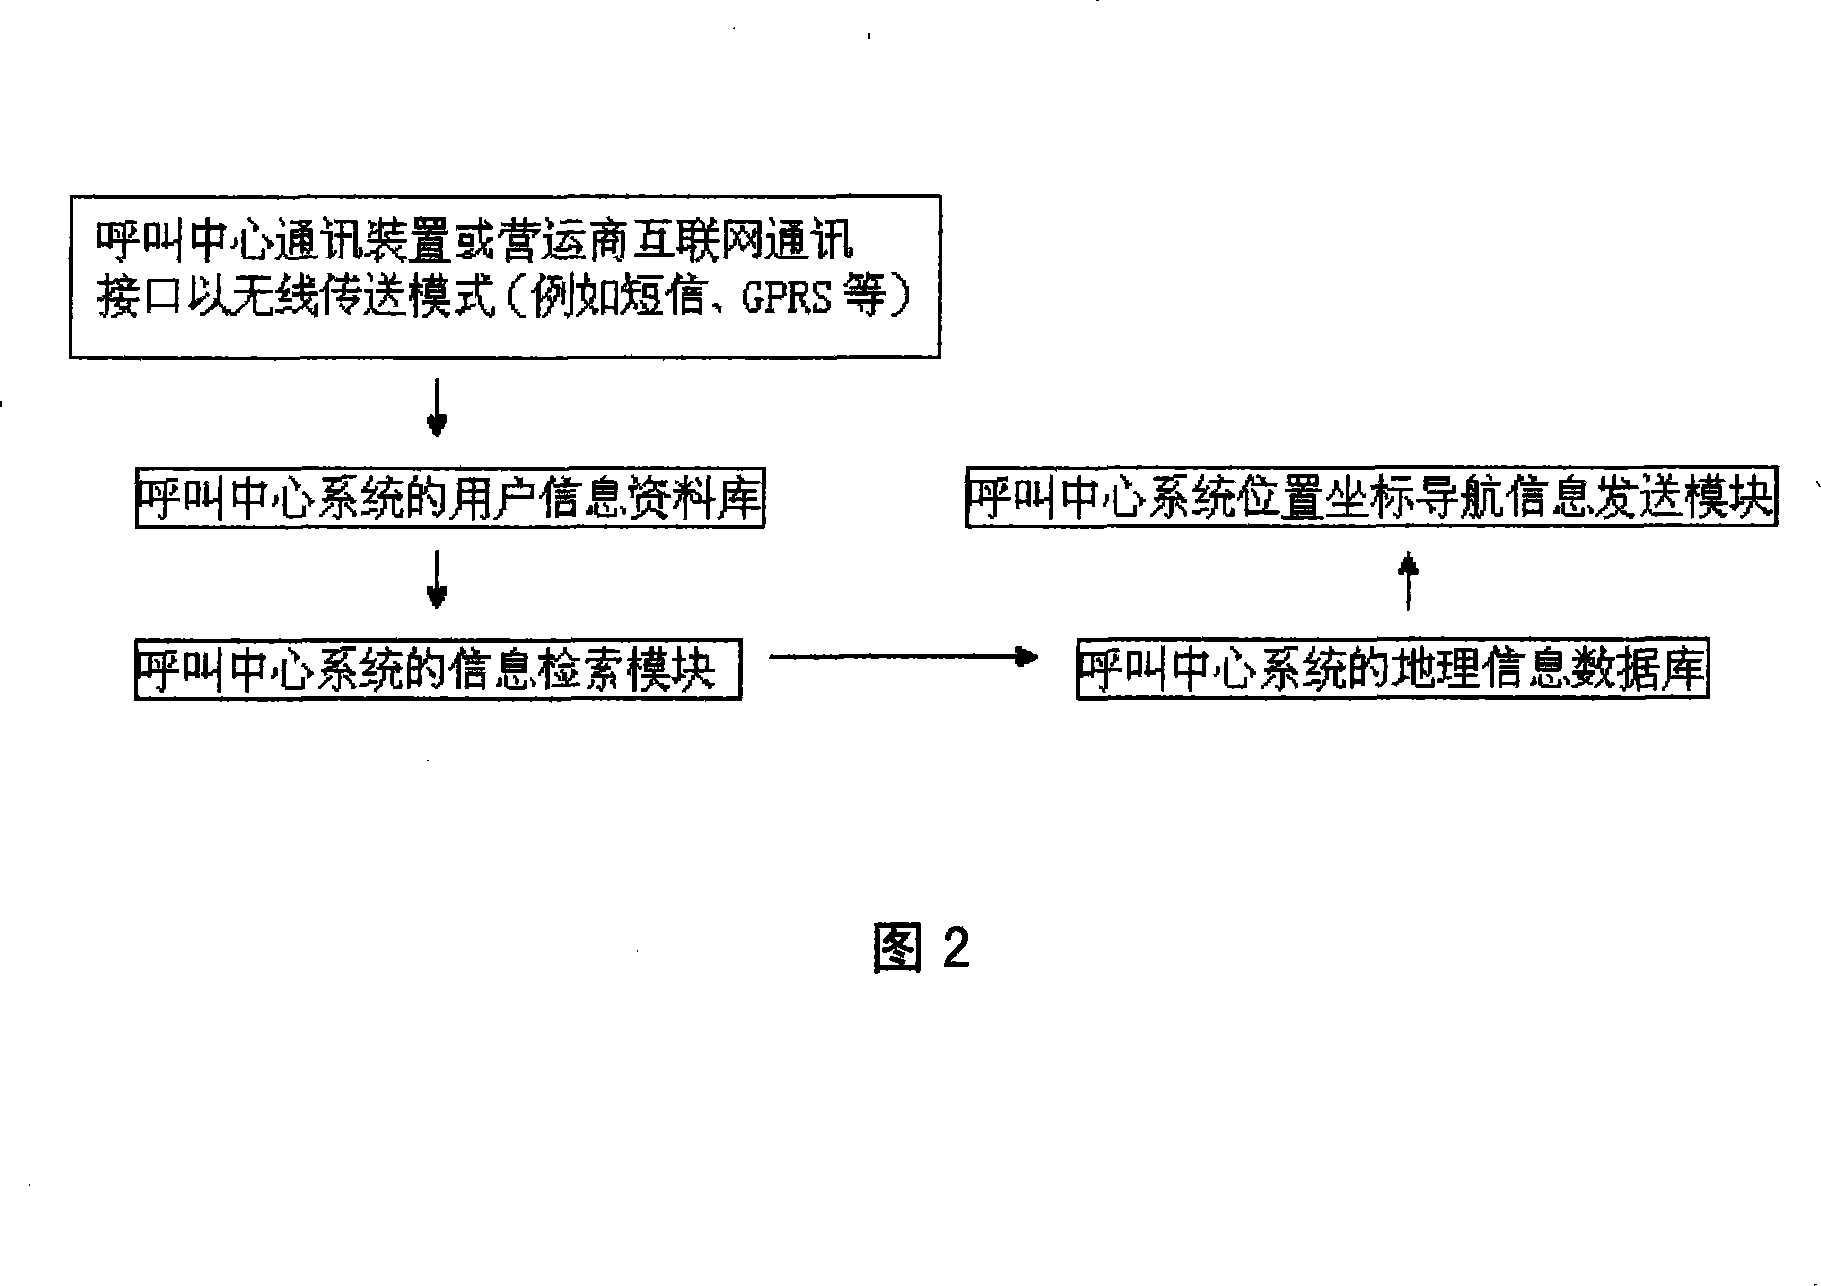 Method and apparatus related to fuzz navigation